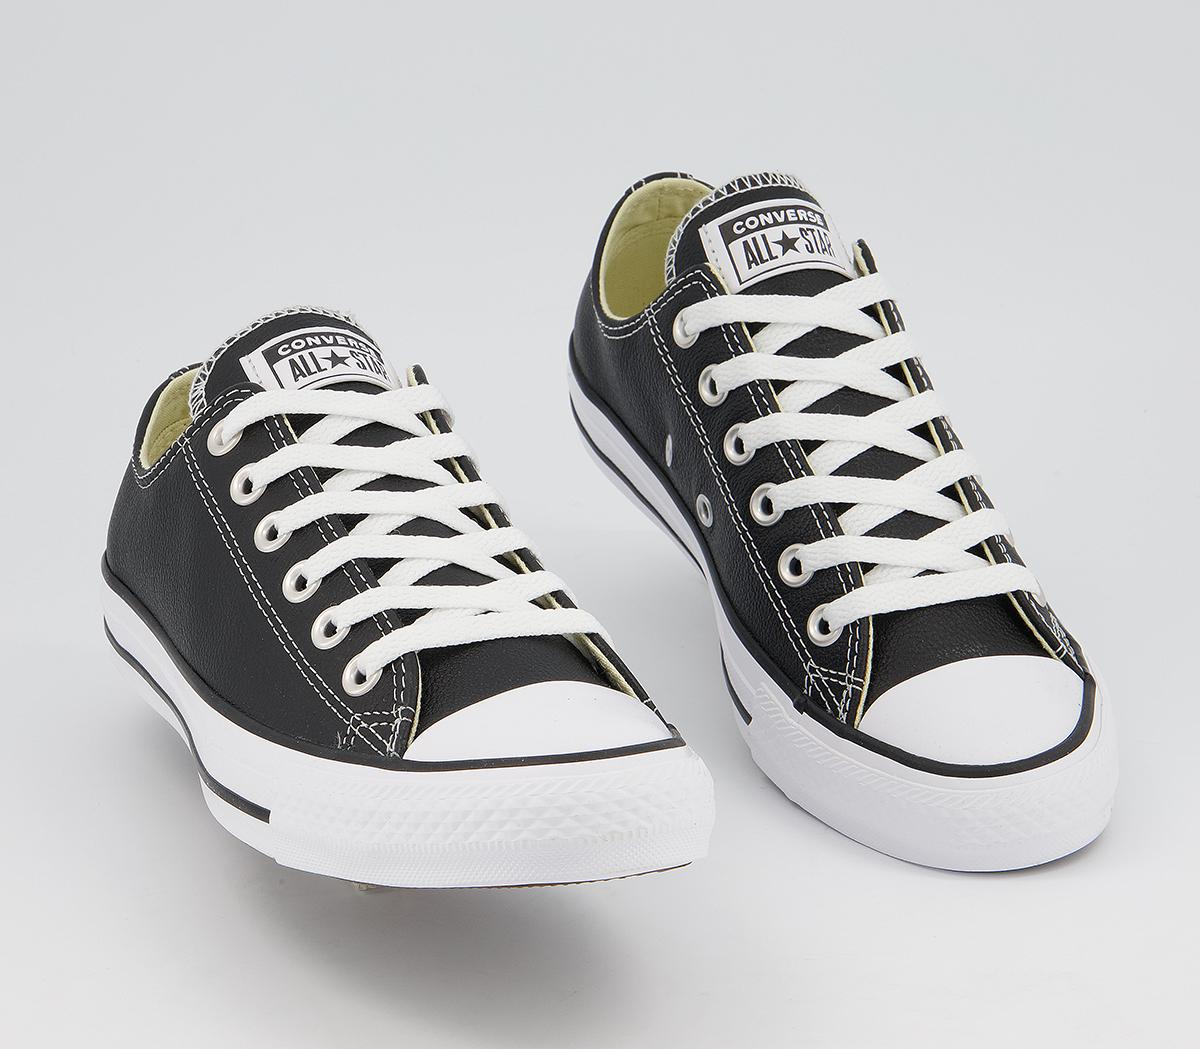 Converse All Star Low Leather Trainers Black White Leather - Unisex Sports